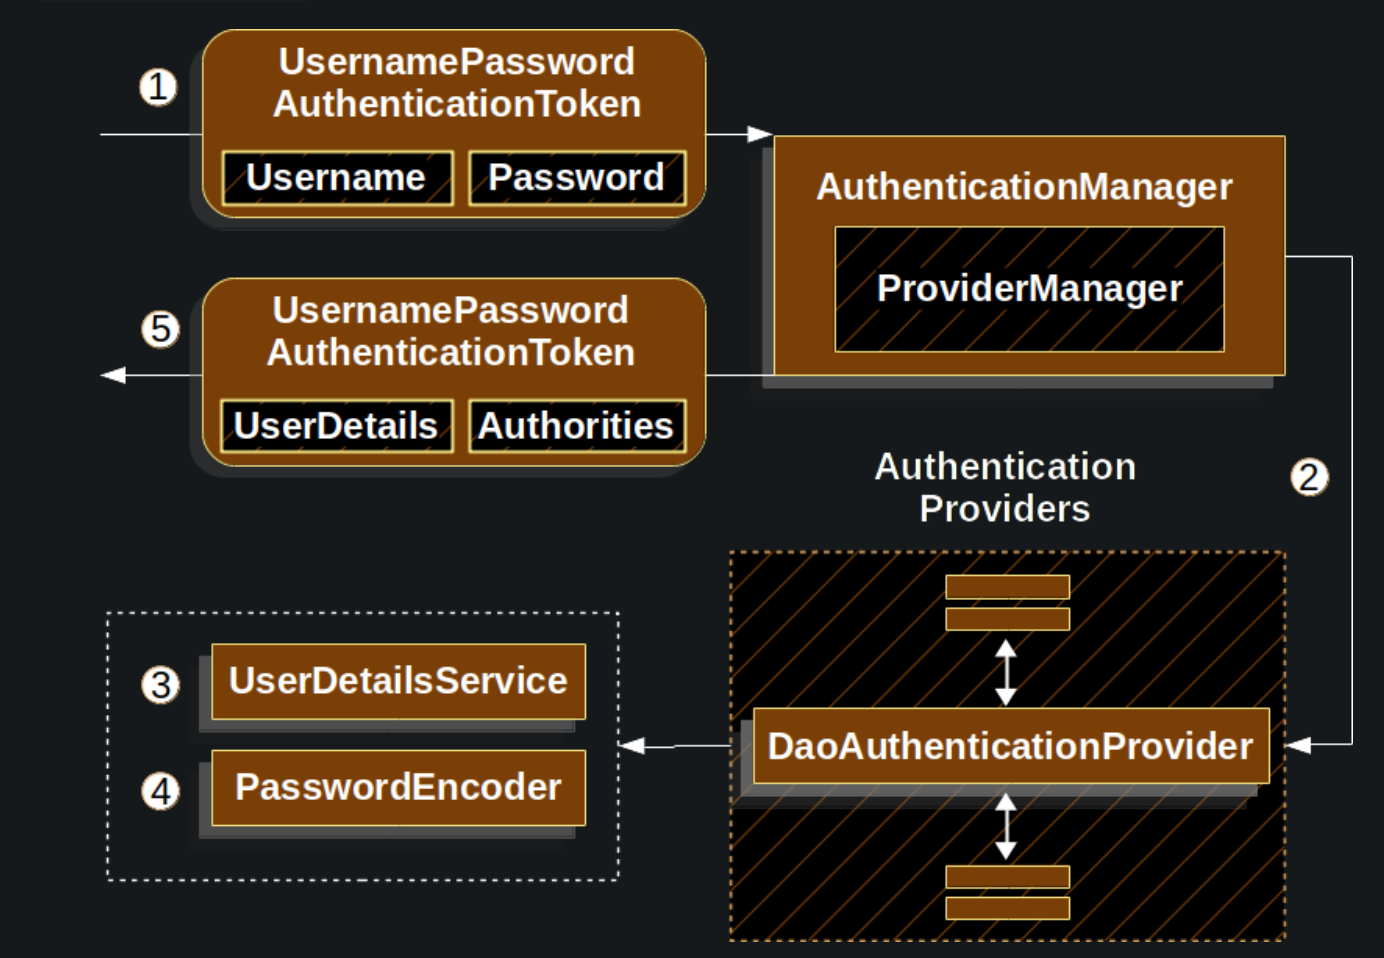 How AuthenticationProvider works